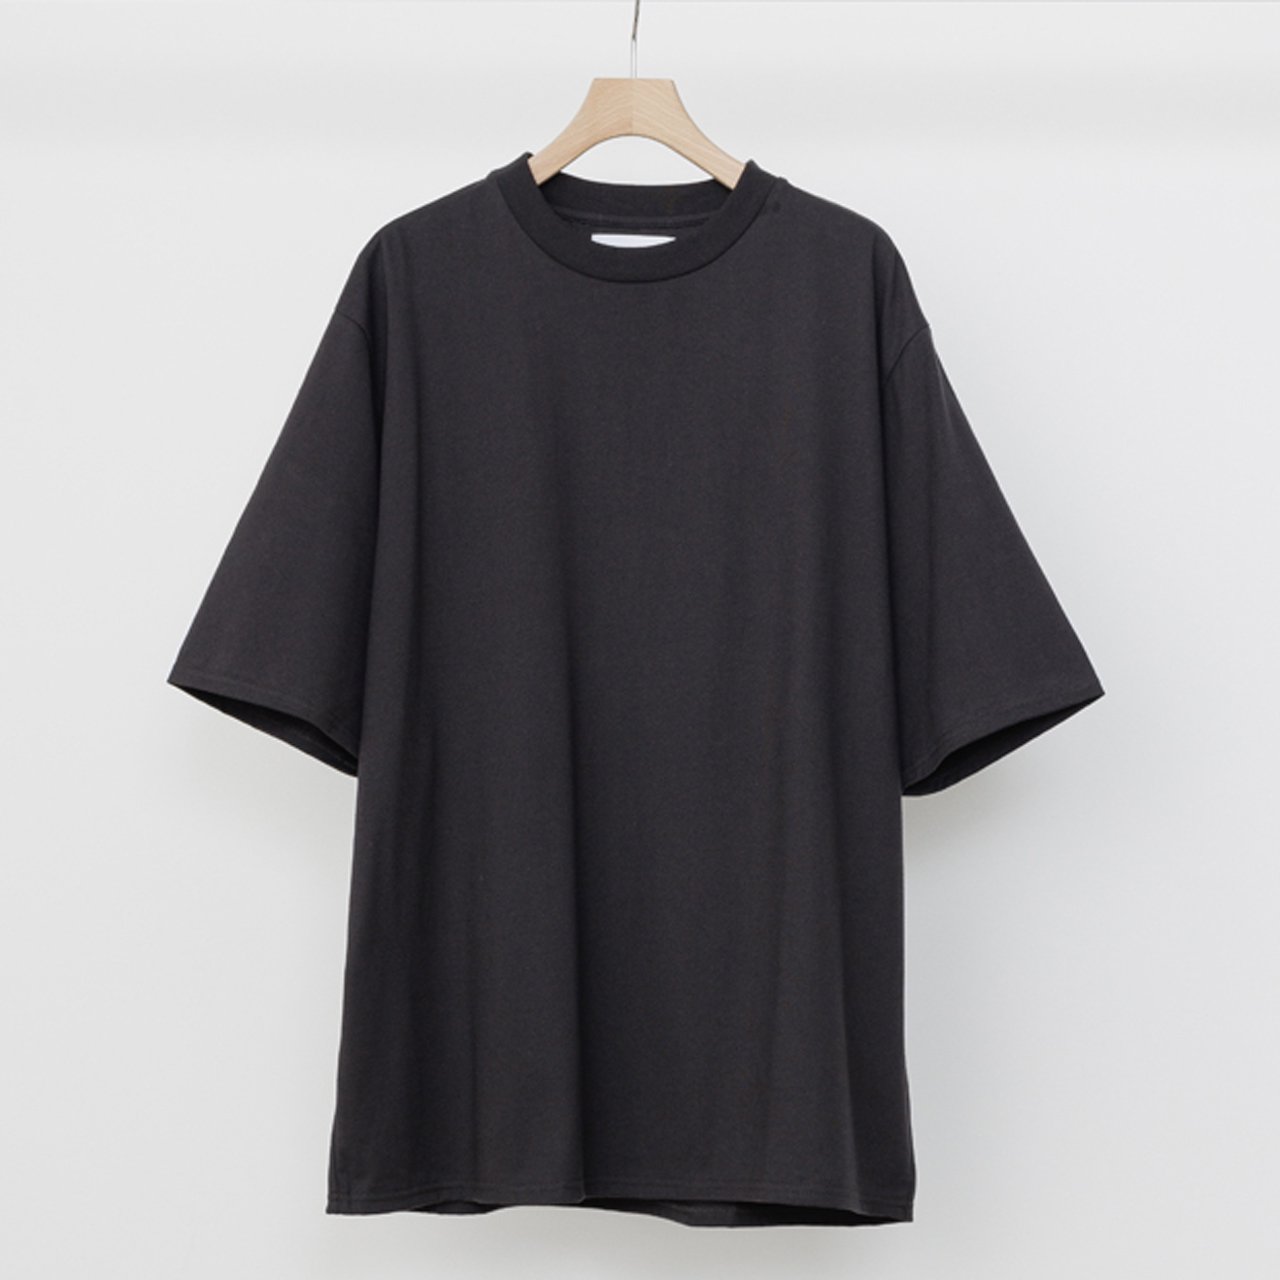 <img class='new_mark_img1' src='https://img.shop-pro.jp/img/new/icons5.gif' style='border:none;display:inline;margin:0px;padding:0px;width:auto;' />marka (マーカ)｜CREW NECK TEE CHARCOAL -40/2 ORGANIC COTTON KNIT-